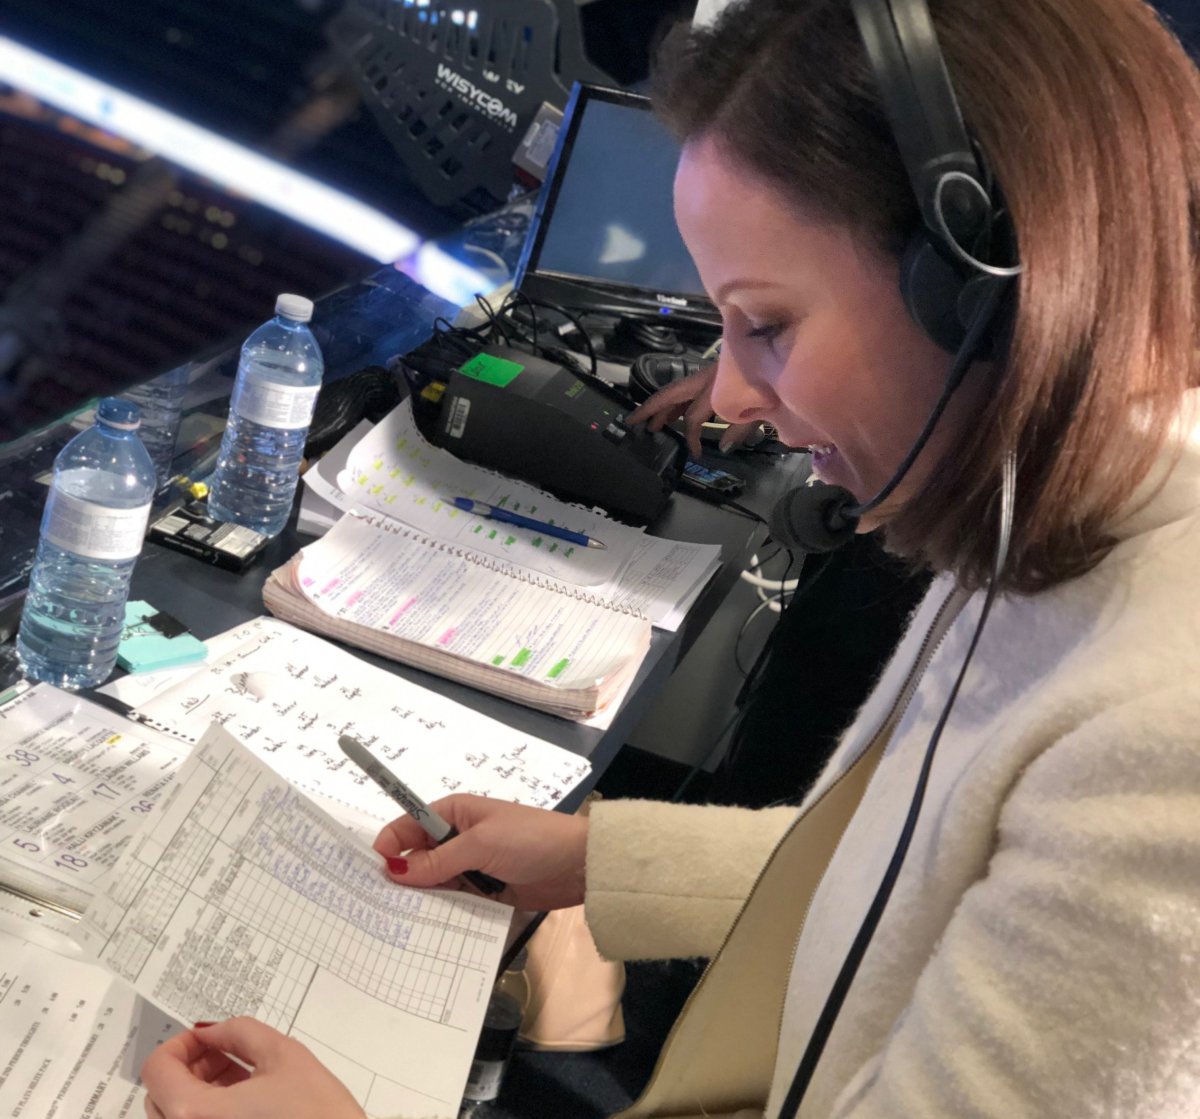 680 CJOB hockey analyst and Rogers Sportsnet play-by-play broadcaster Leah Hextall recapping the scoring plays of the CWHL All-Star Game at Scotiabank Arena in Toronto.